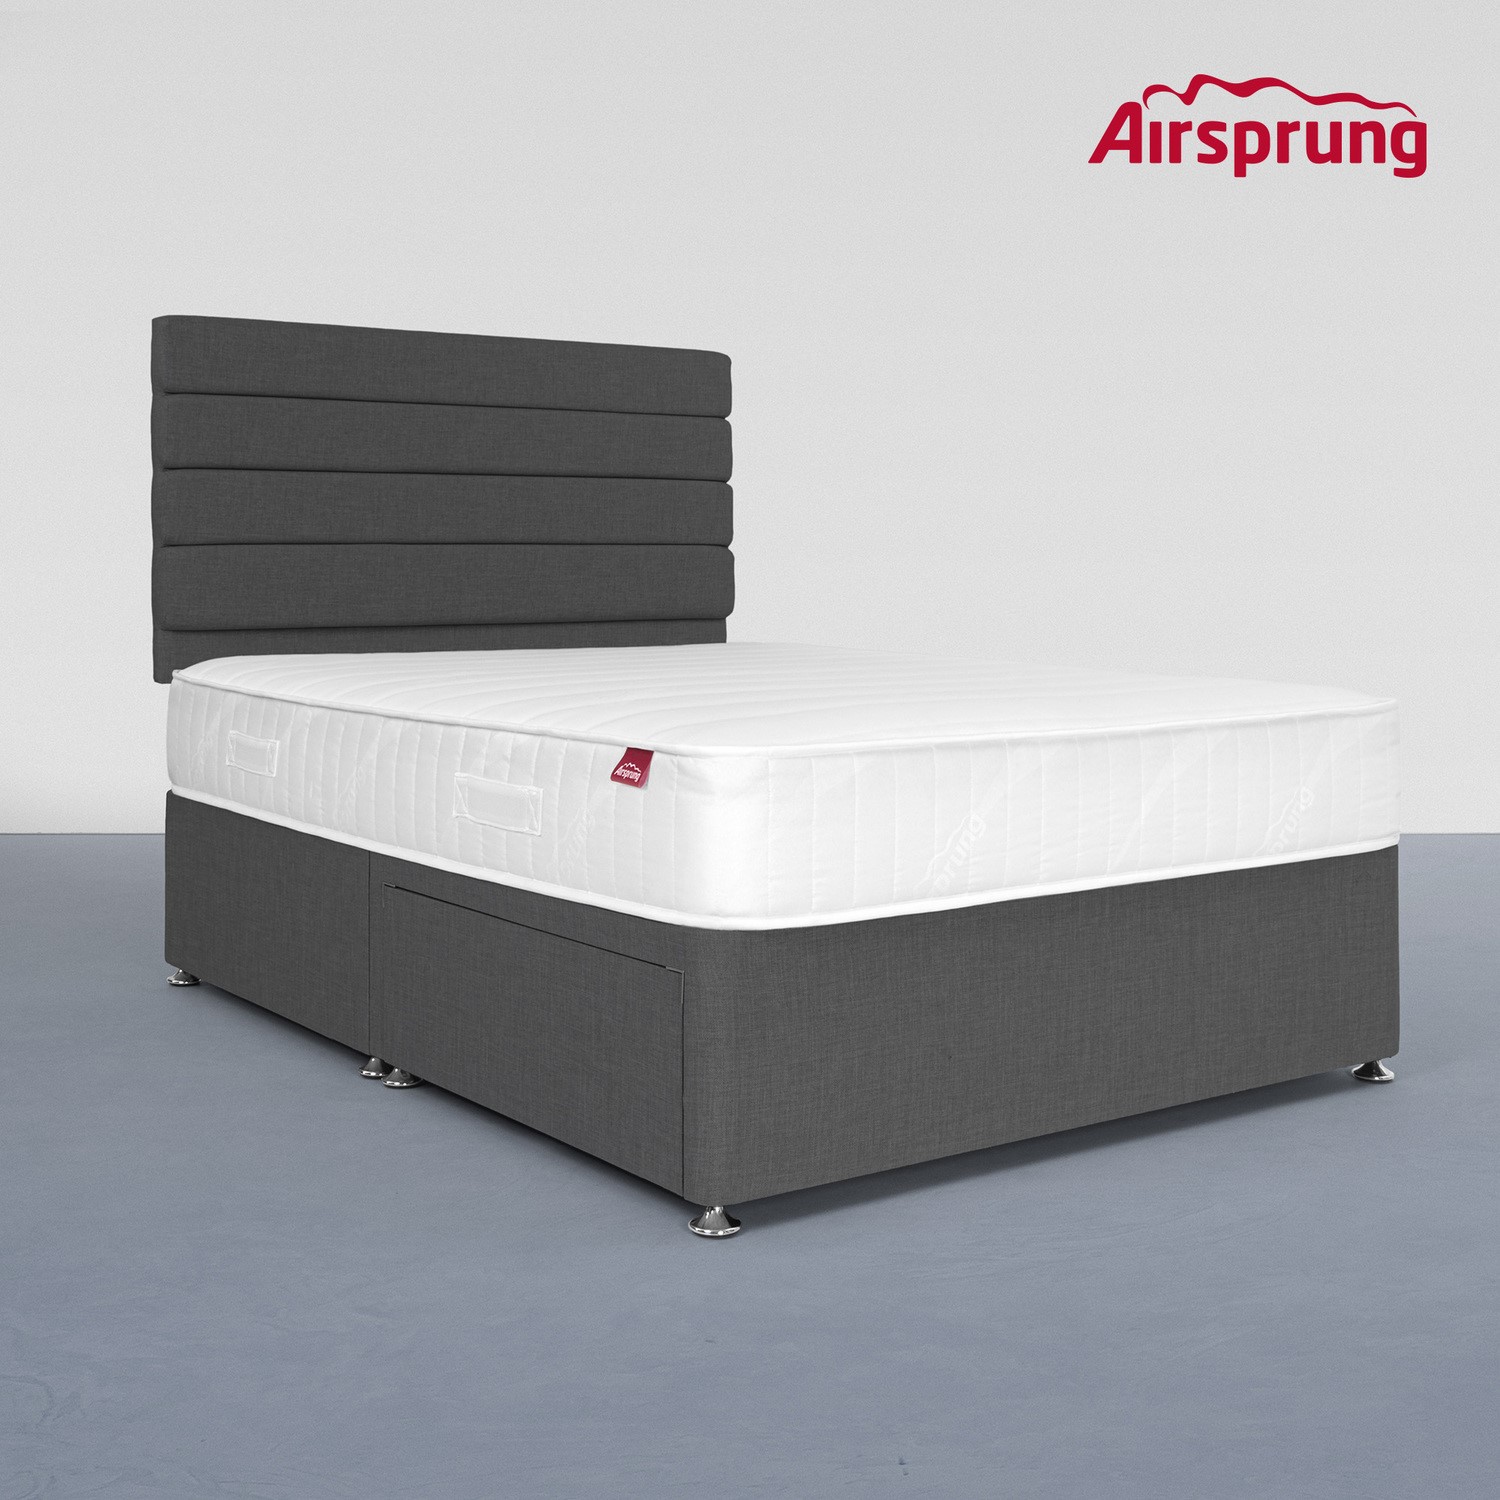 Photo of Airsprung king size 2 drawer divan bed with comfort mattress - charcoal